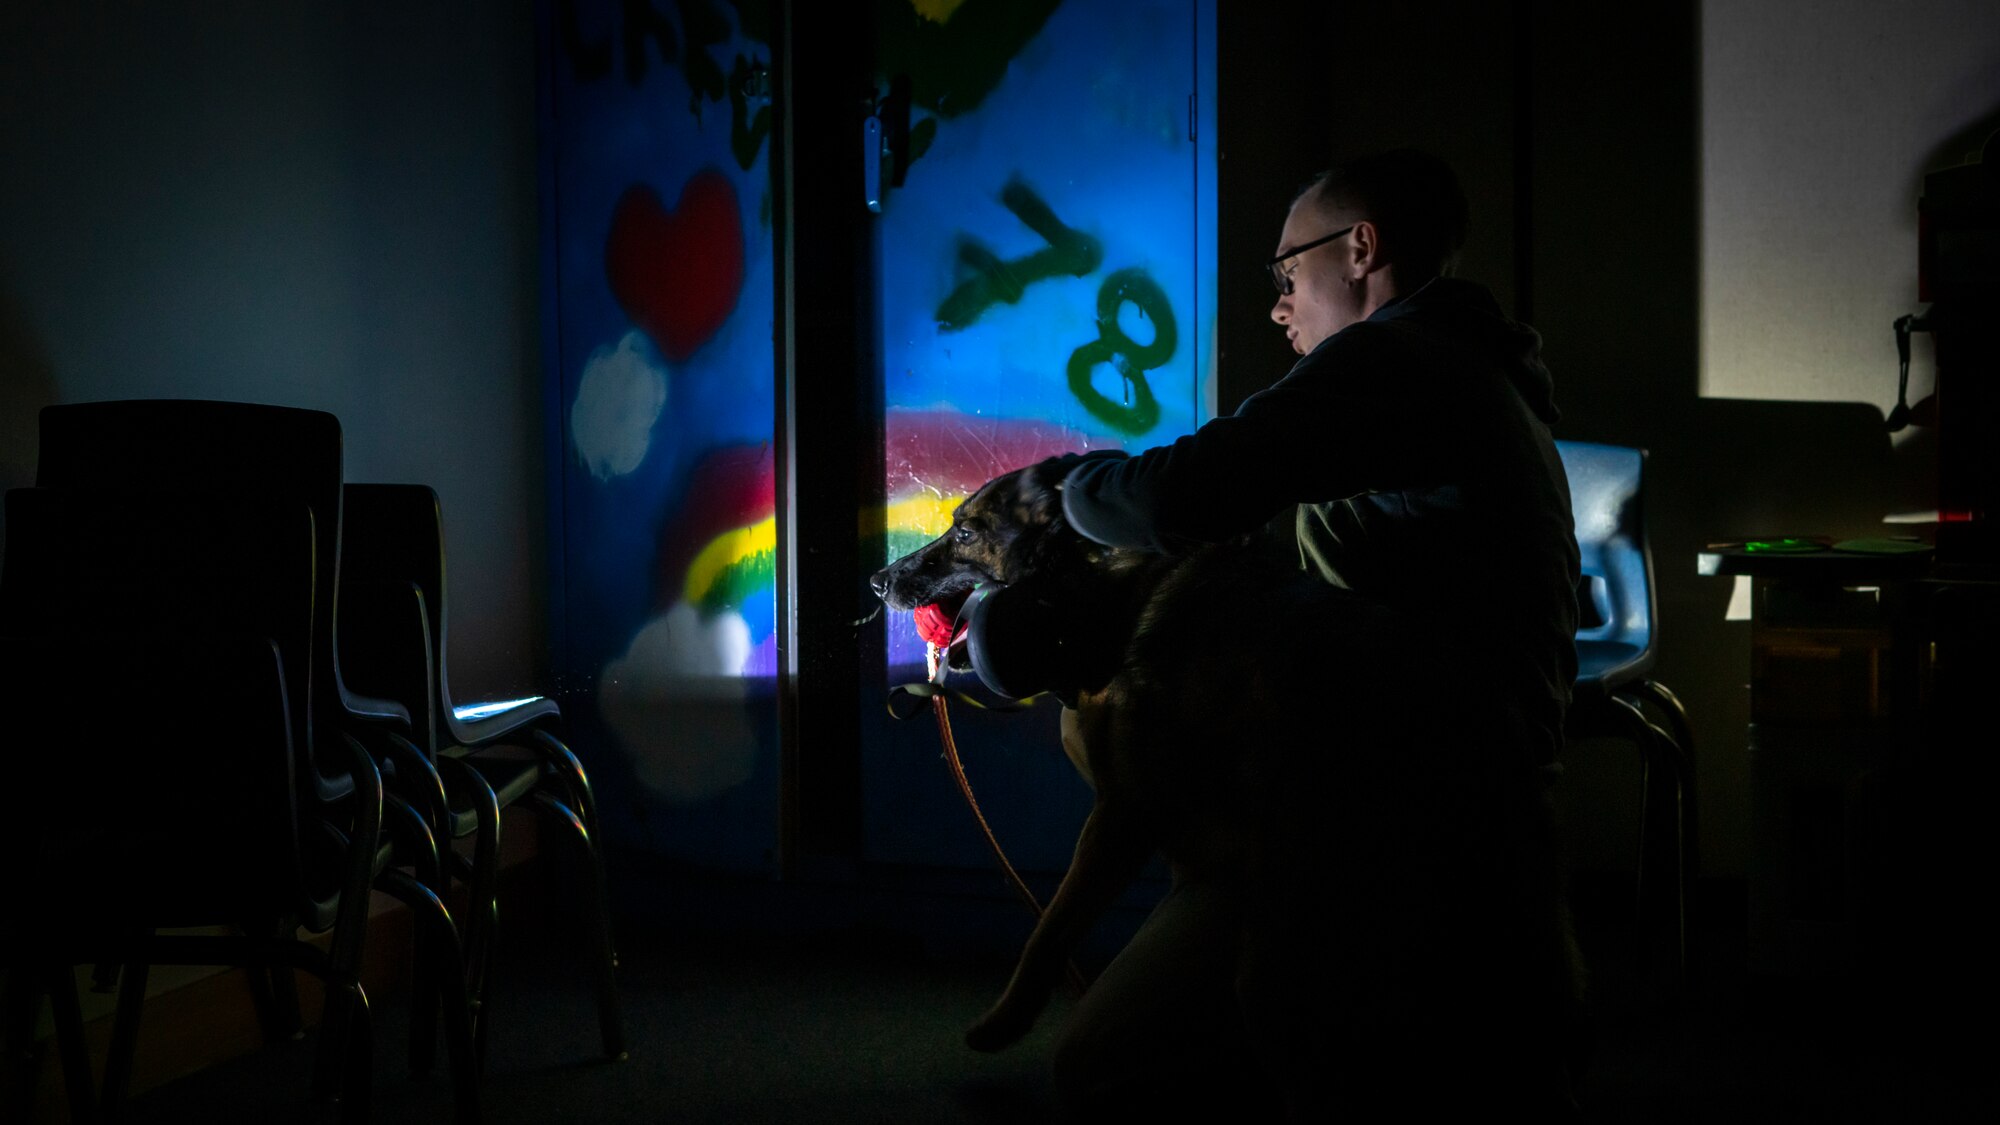 Military working dog trainer rewards his MWD with a toy as they search the building for simulated explosives